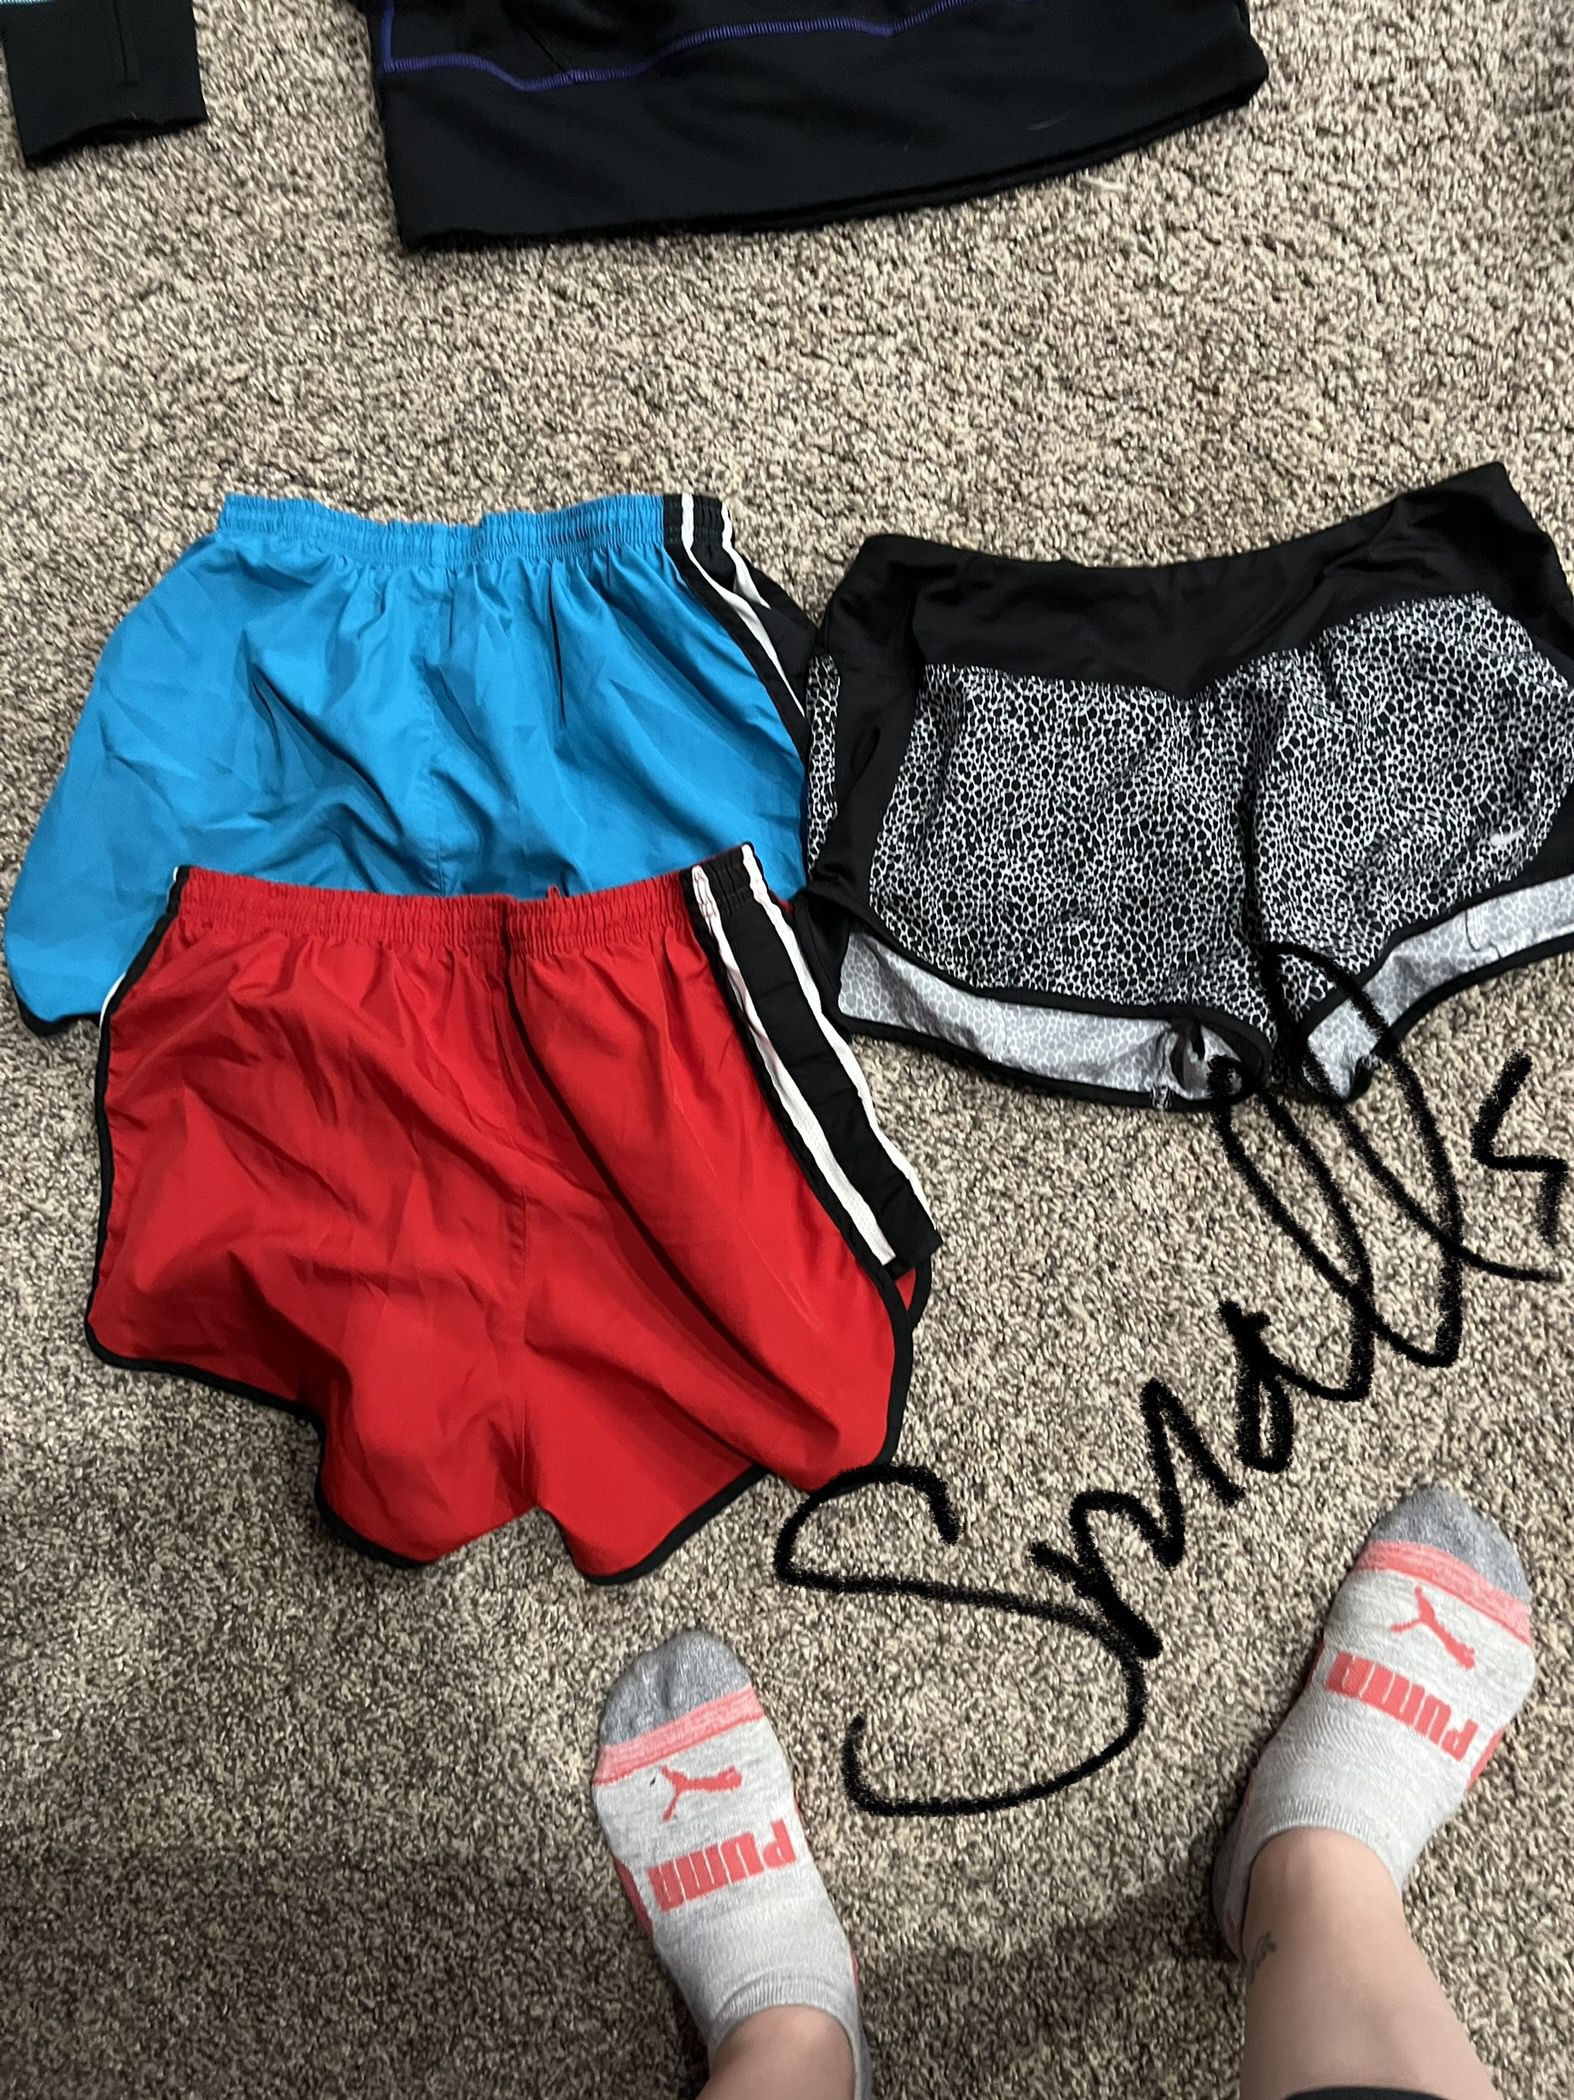 Nike clothes  